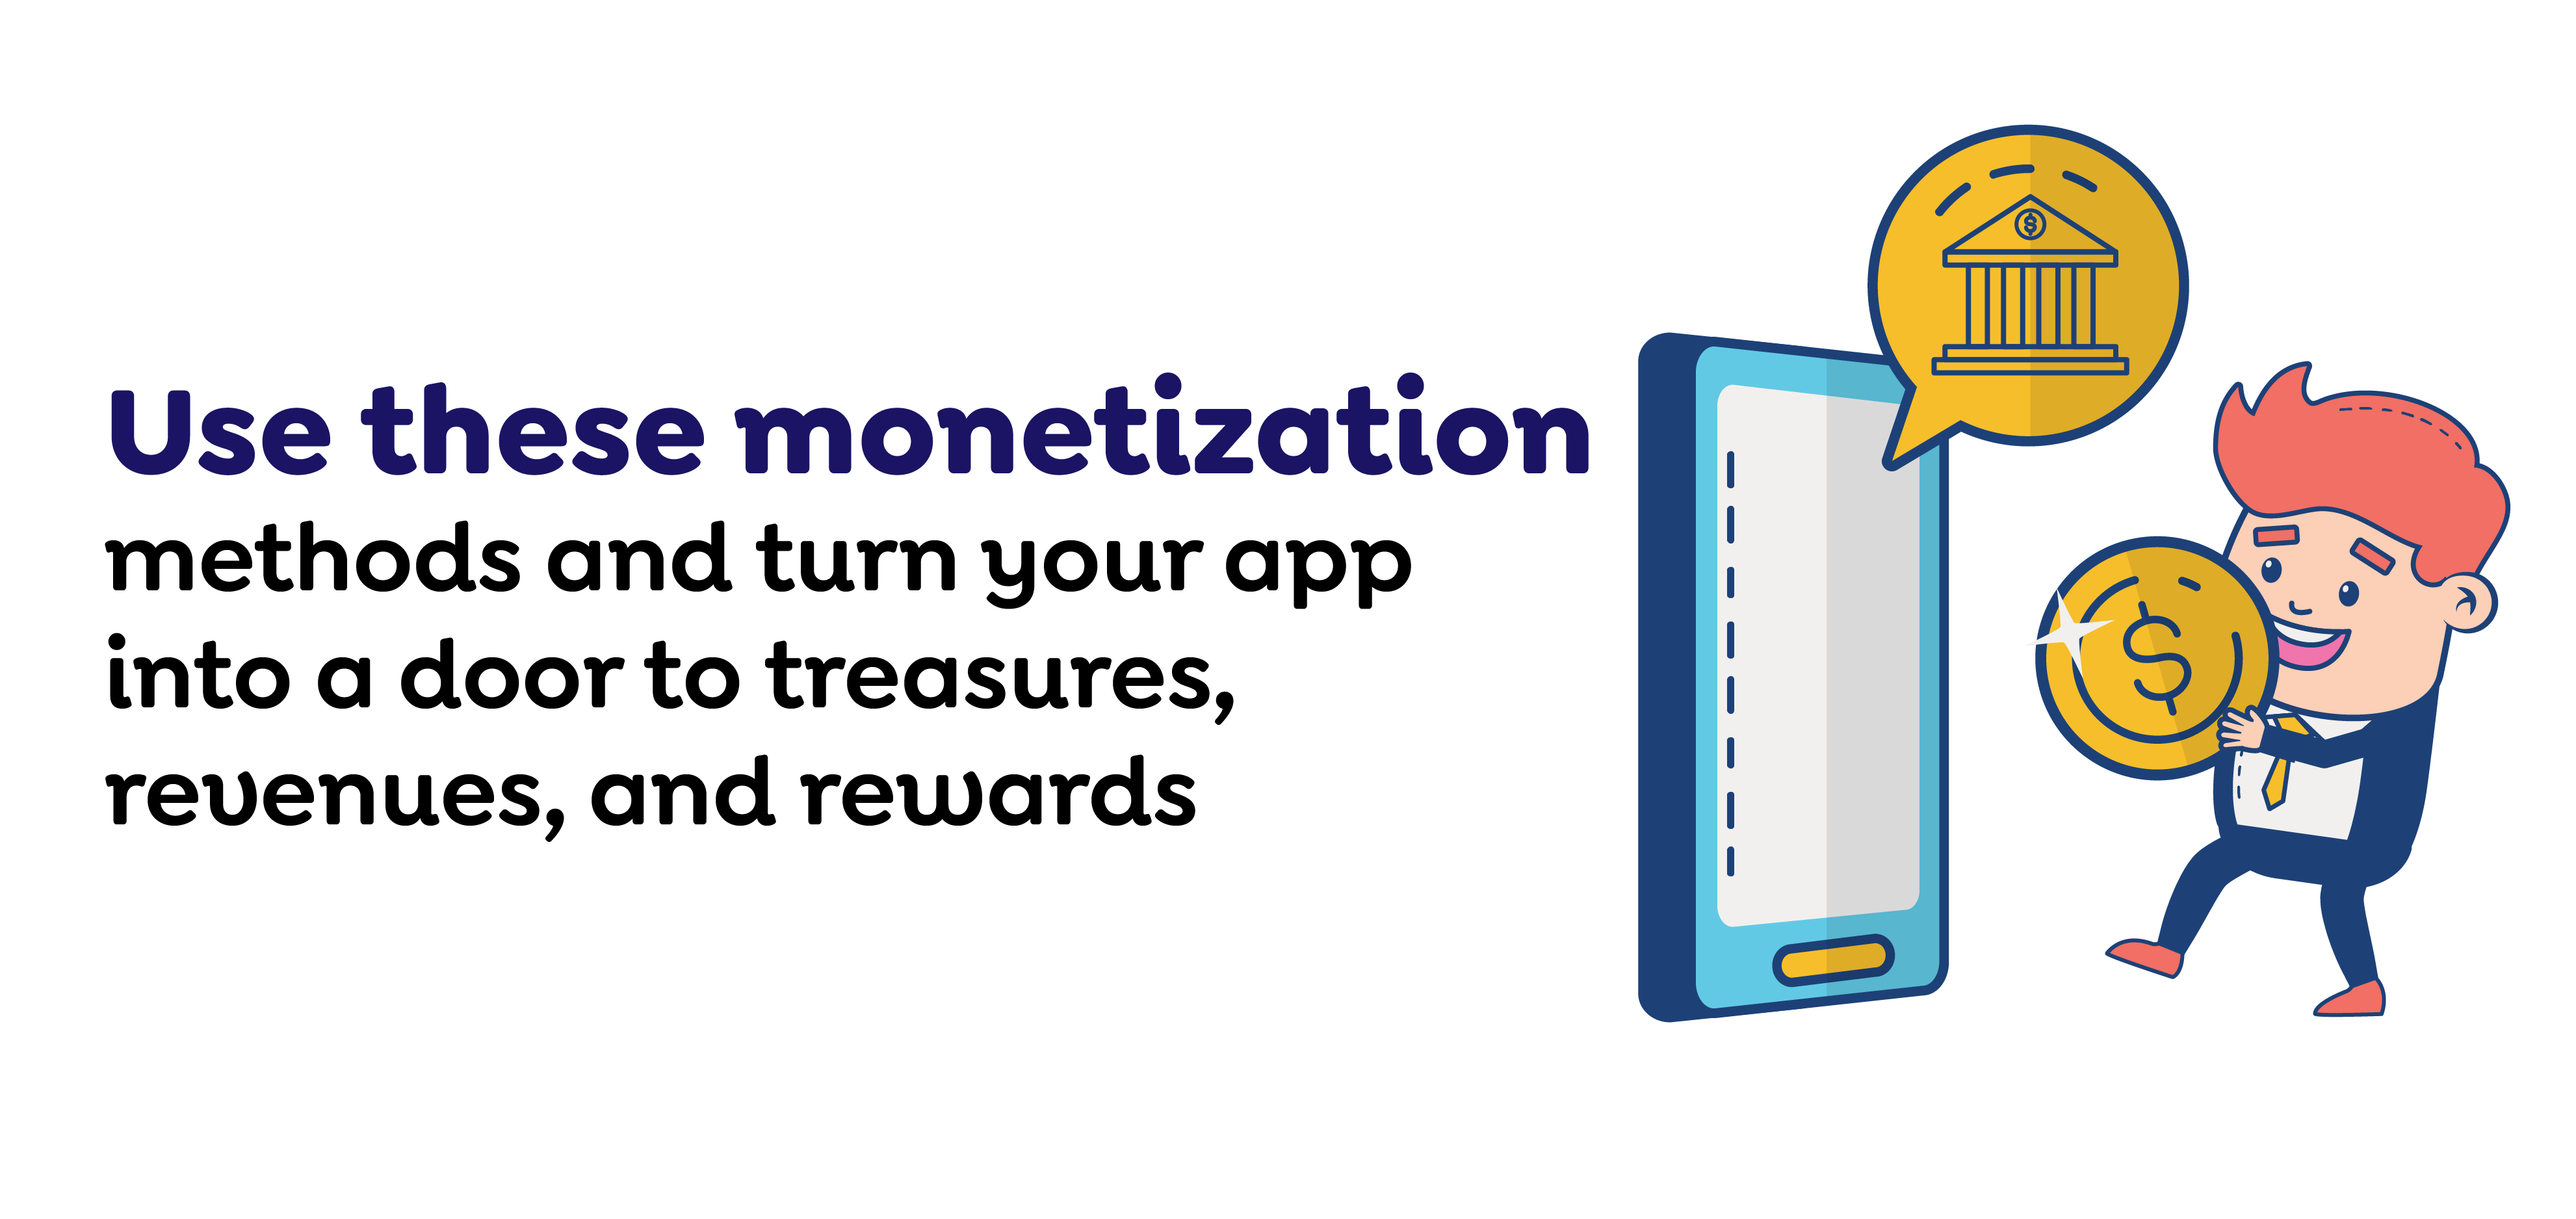 Use these monetization methods and turn your app into a door to treasures, revenues, and rewards